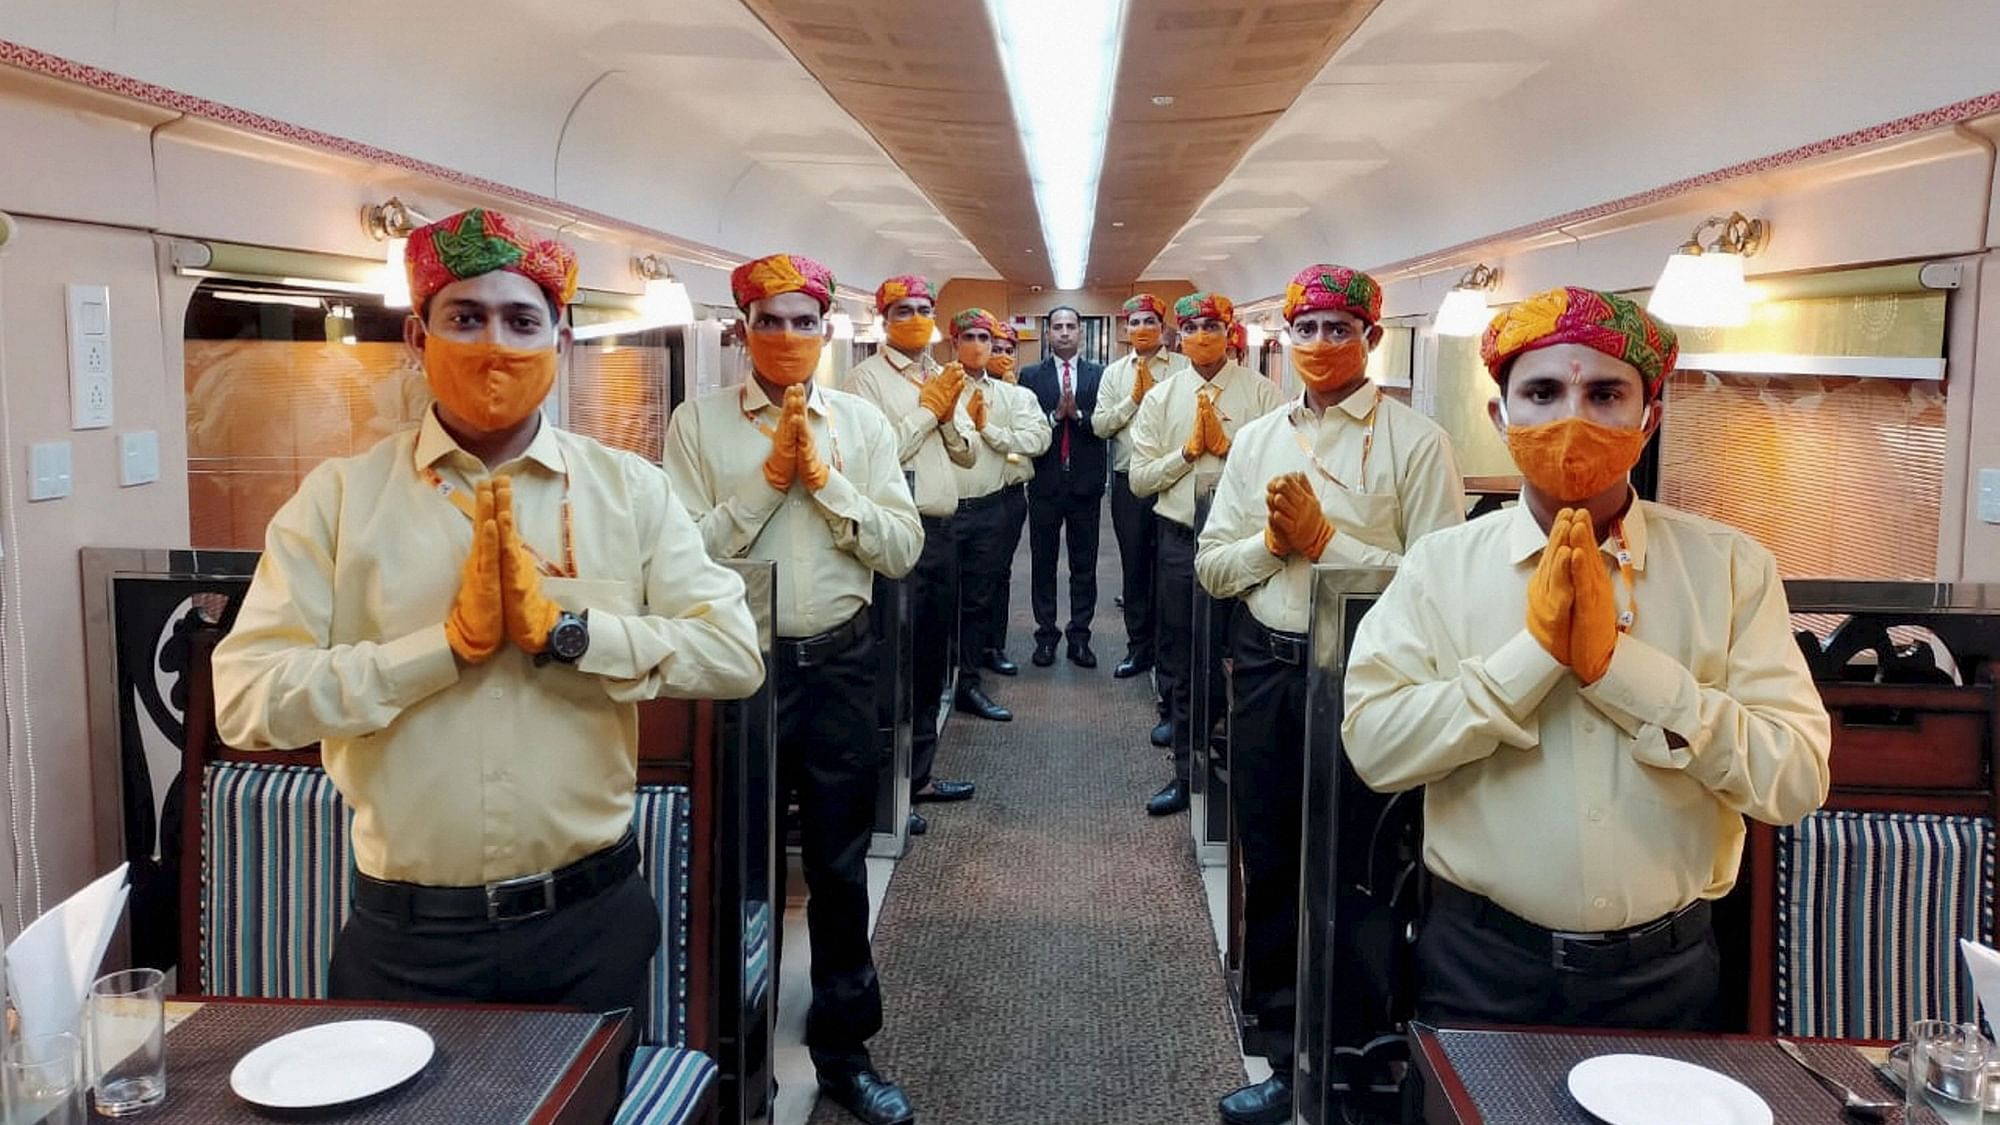 <div class="paragraphs"><p>The Indian Railways on Monday, 22 November, changed the uniform of the personnel aboard the Ramayan Express after seers raised vehement opposition to the stewards' saffron attire.</p></div>